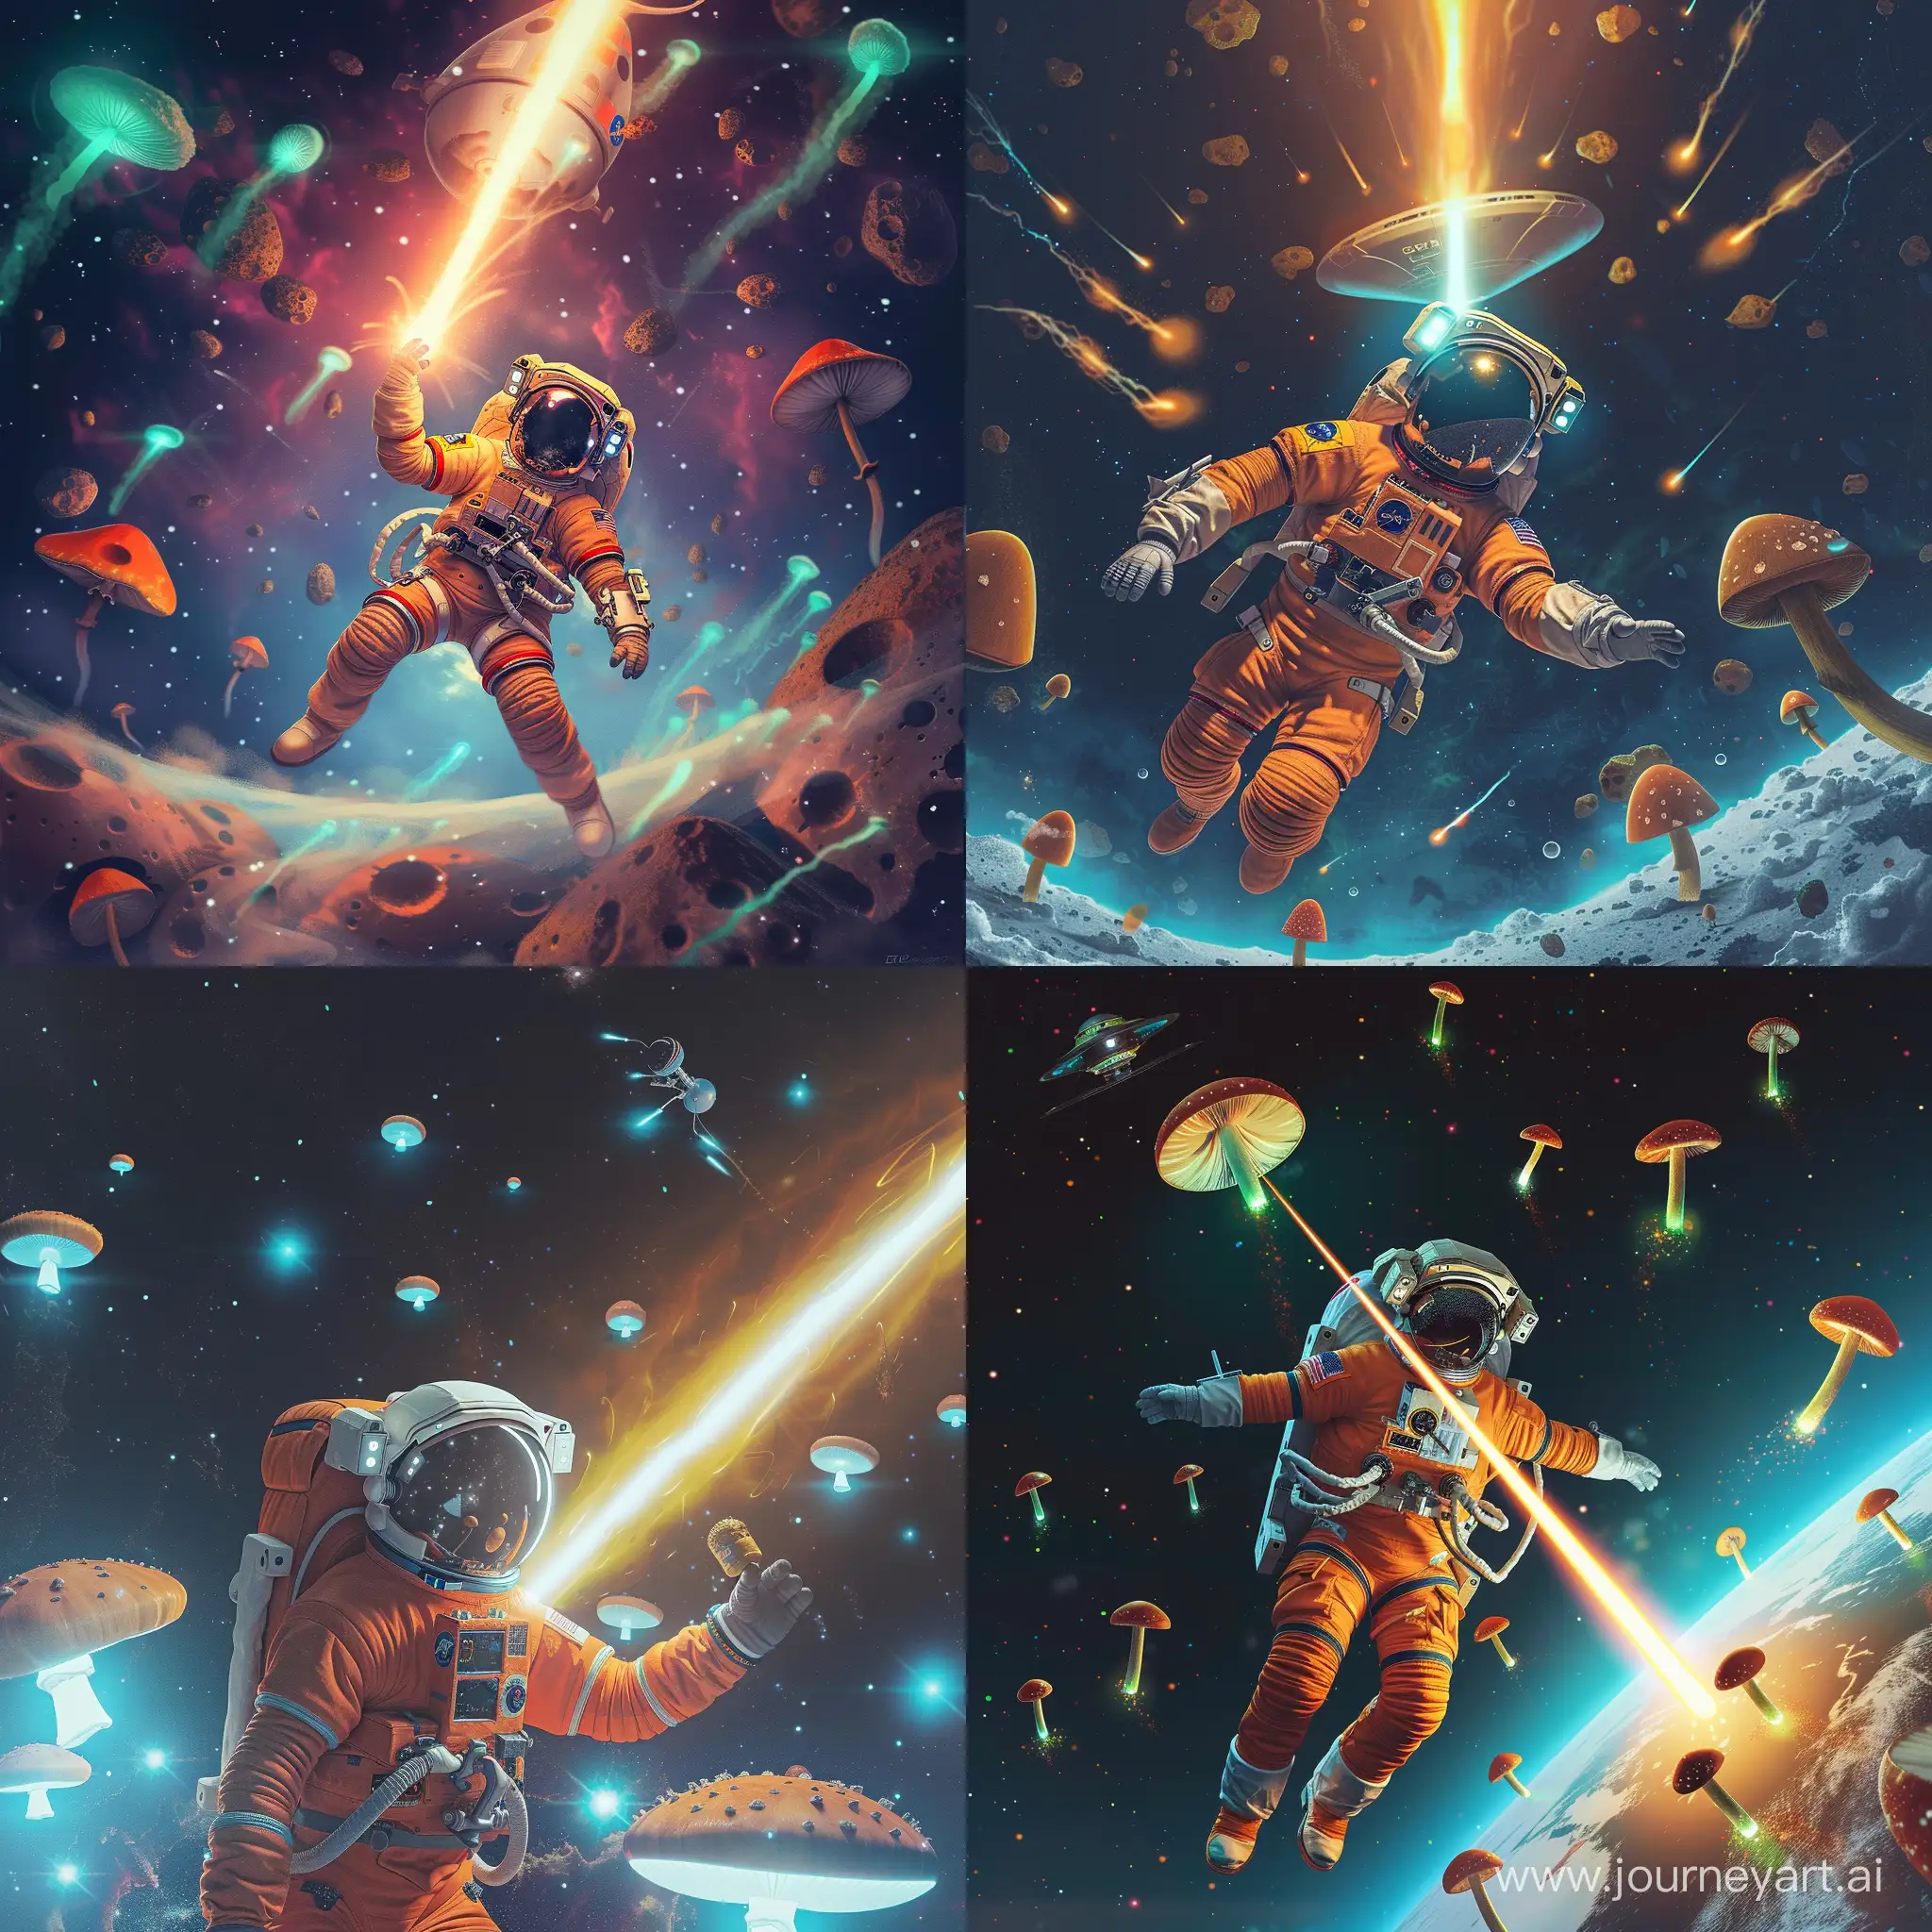 an astronaut in an orange spacesuit in space is abducted by a UFO beam, glowing mushrooms fly around